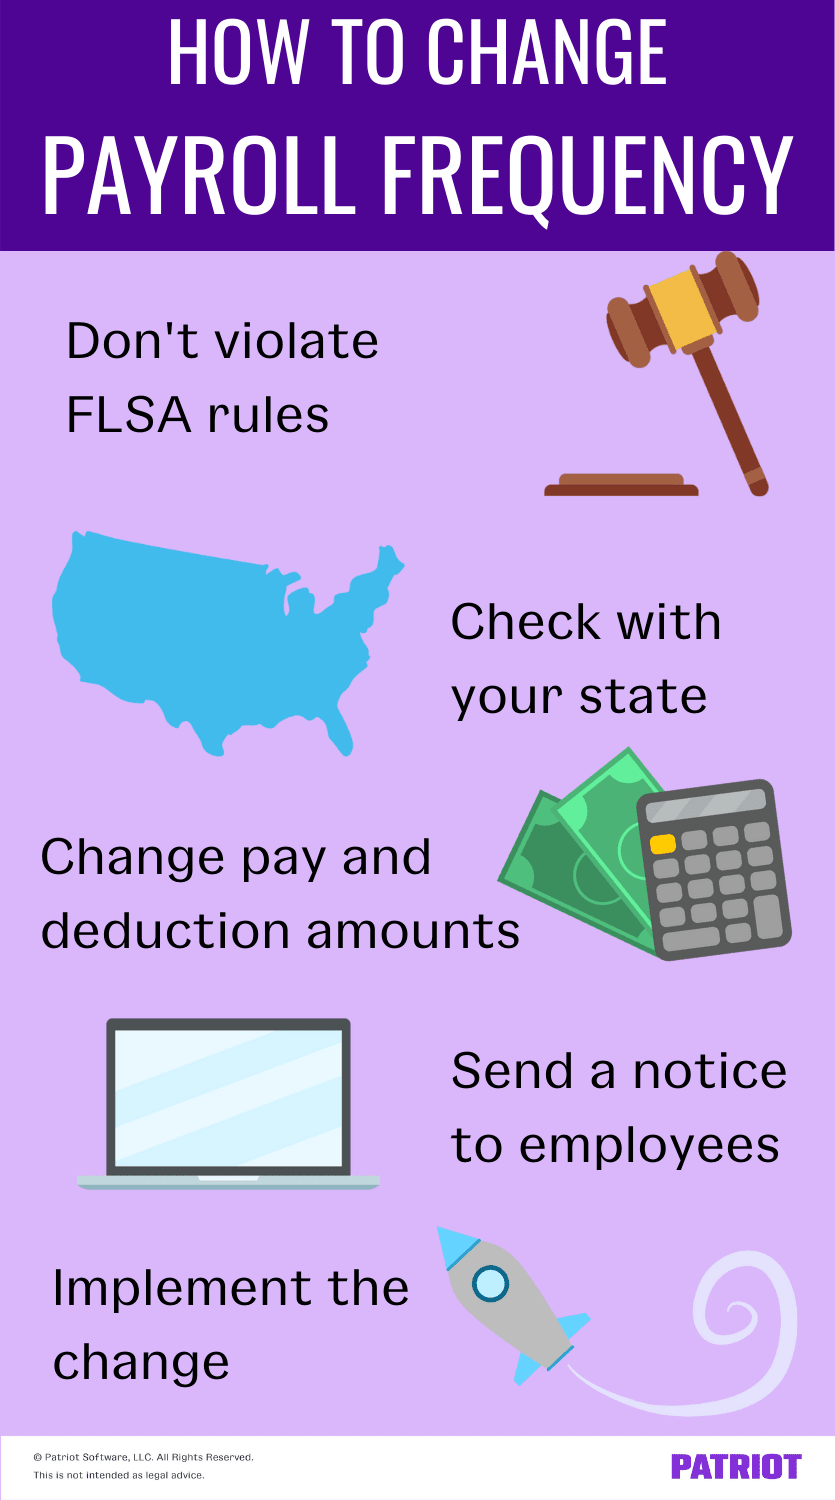 How to change payroll frequency: 1) don't violate FLSA rules 2) Check with your state 3) Change pay and deduction amounts 4) Send a notice to employees 5) Implement the change